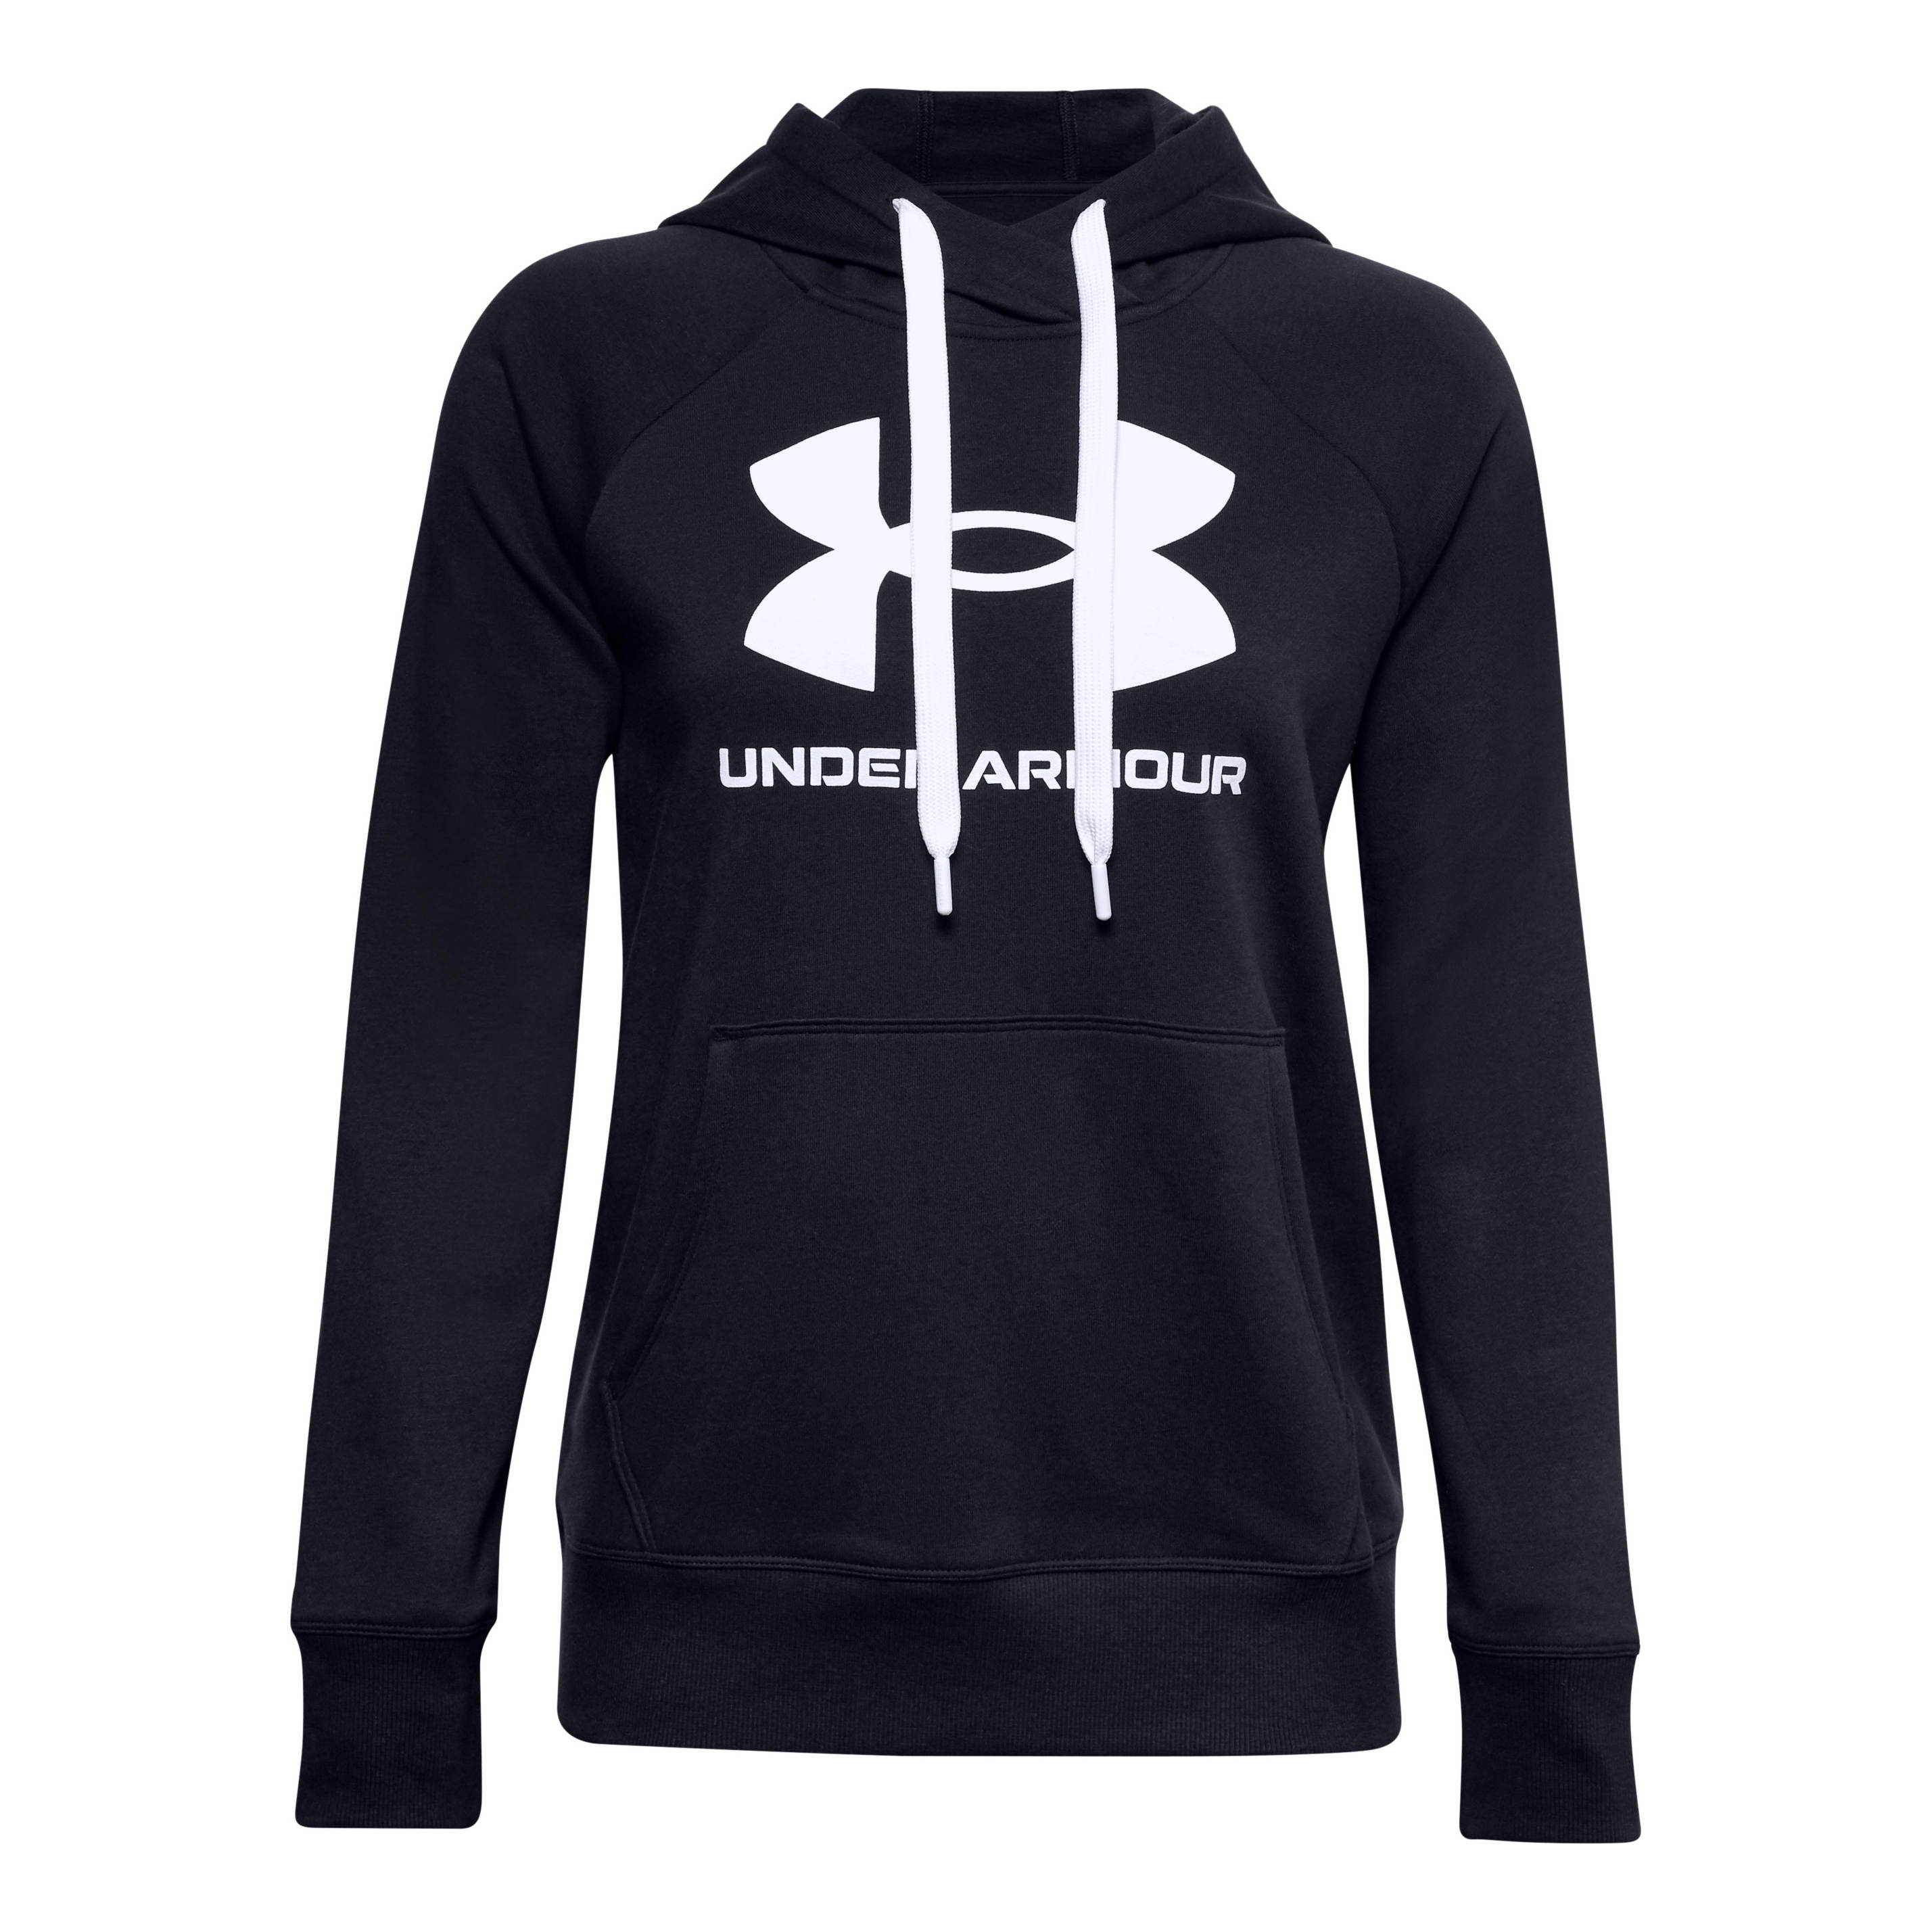 Under Armour Rival Fleece HB Hoodie Red / White - Free delivery